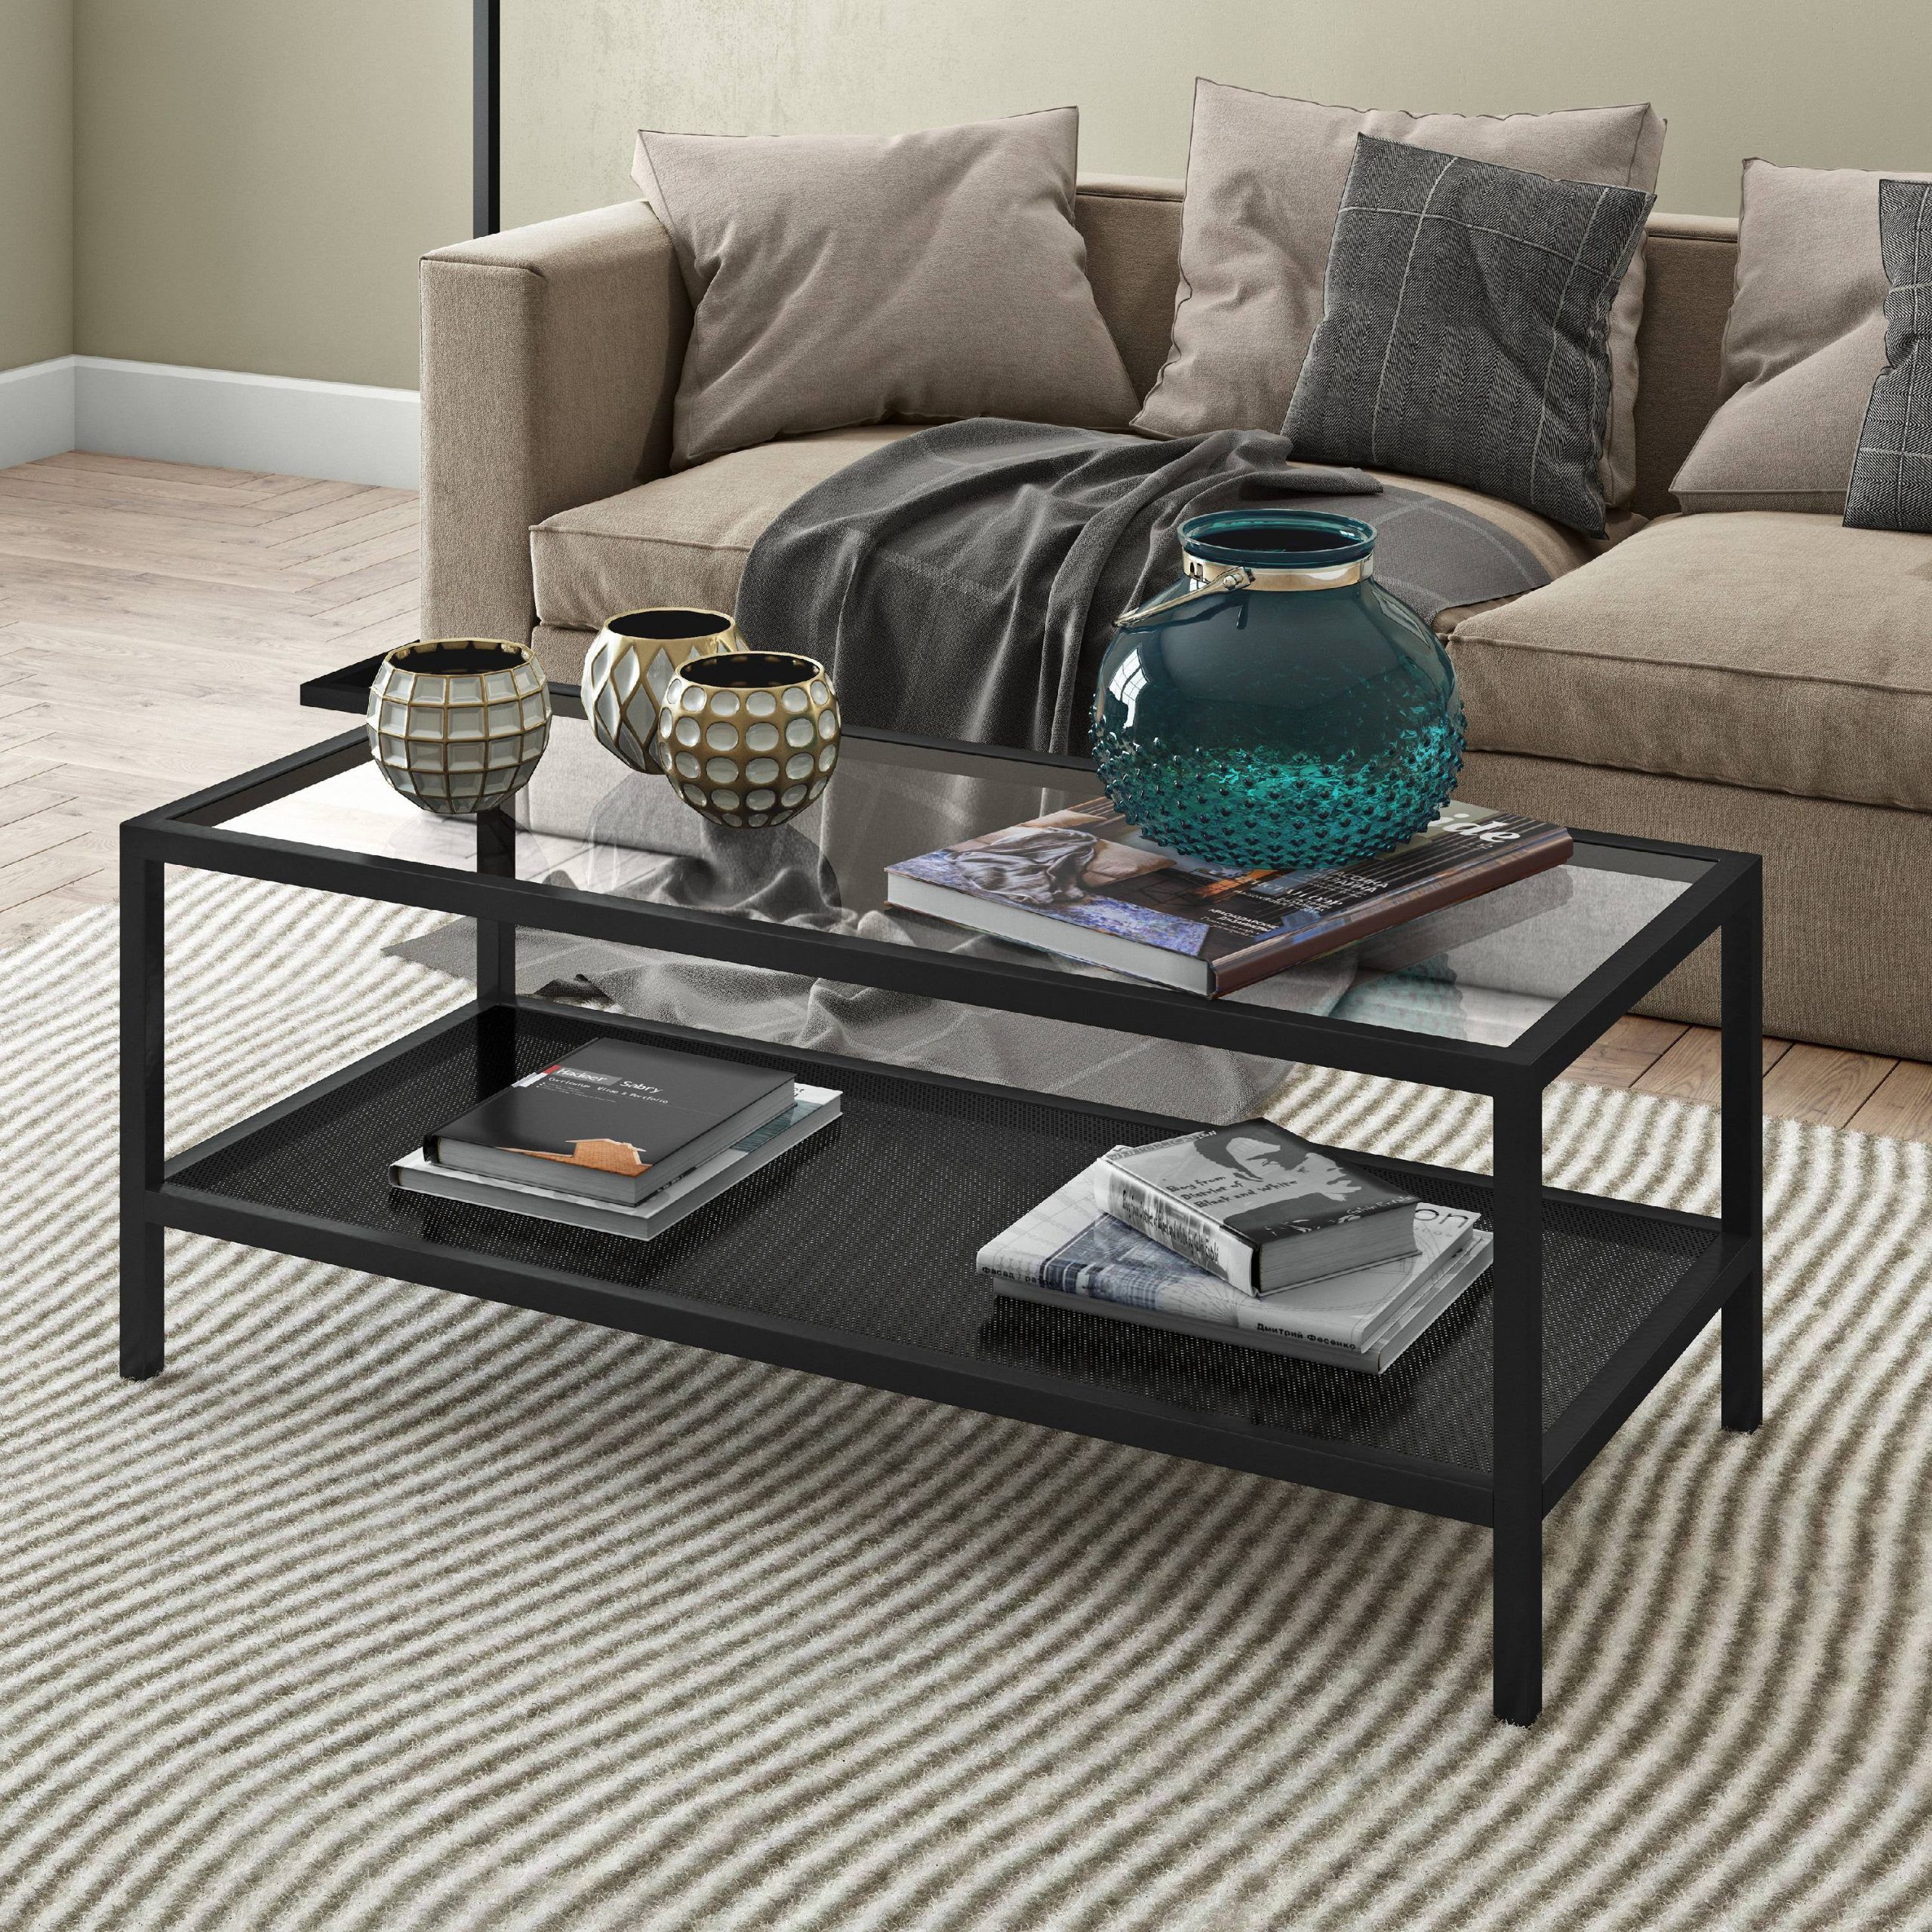 Evelyn&zoe Contemporary Metal Coffee Table With Glass Top – Walmart Intended For Studio 350 Black Metal Coffee Tables (View 12 of 20)